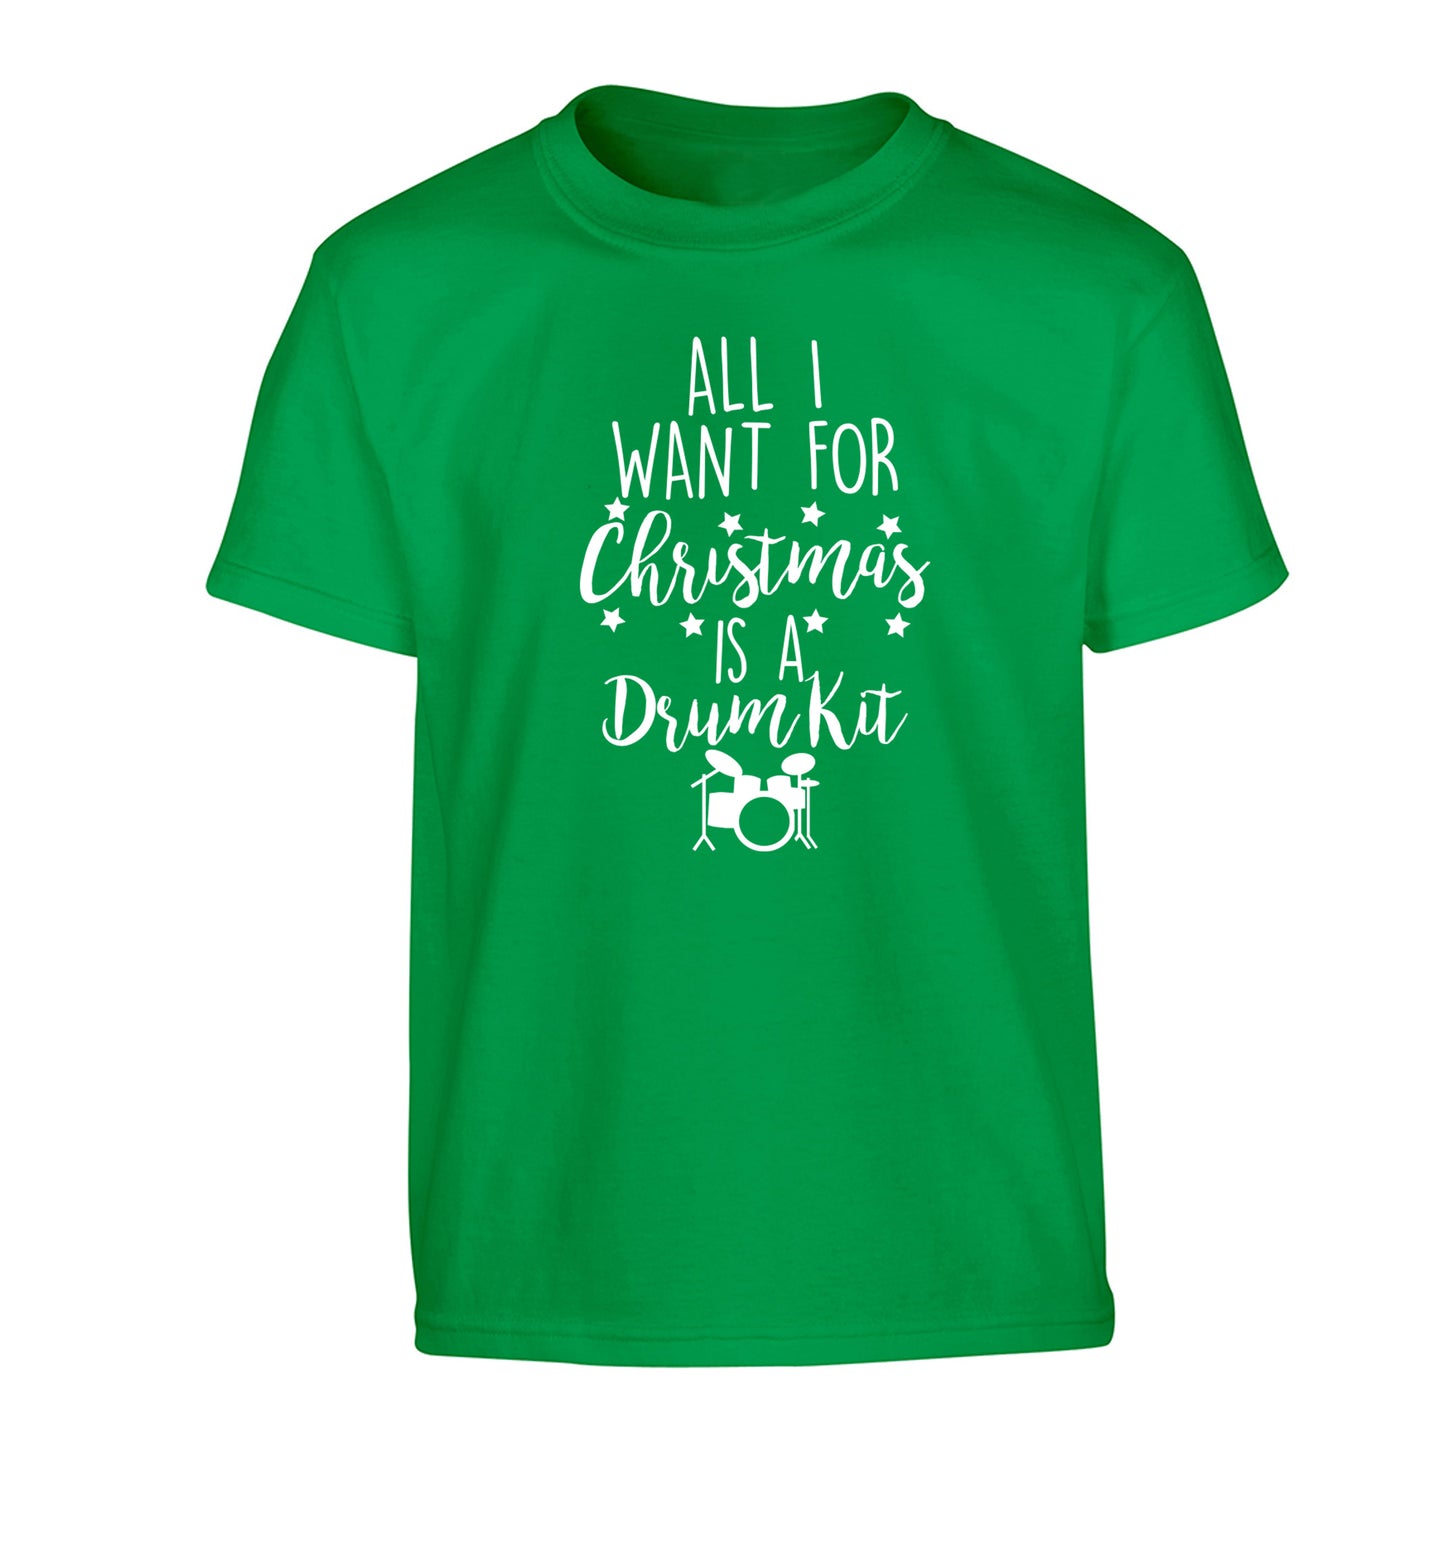 All I want for Christmas is a drum kit! Children's green Tshirt 12-14 Years